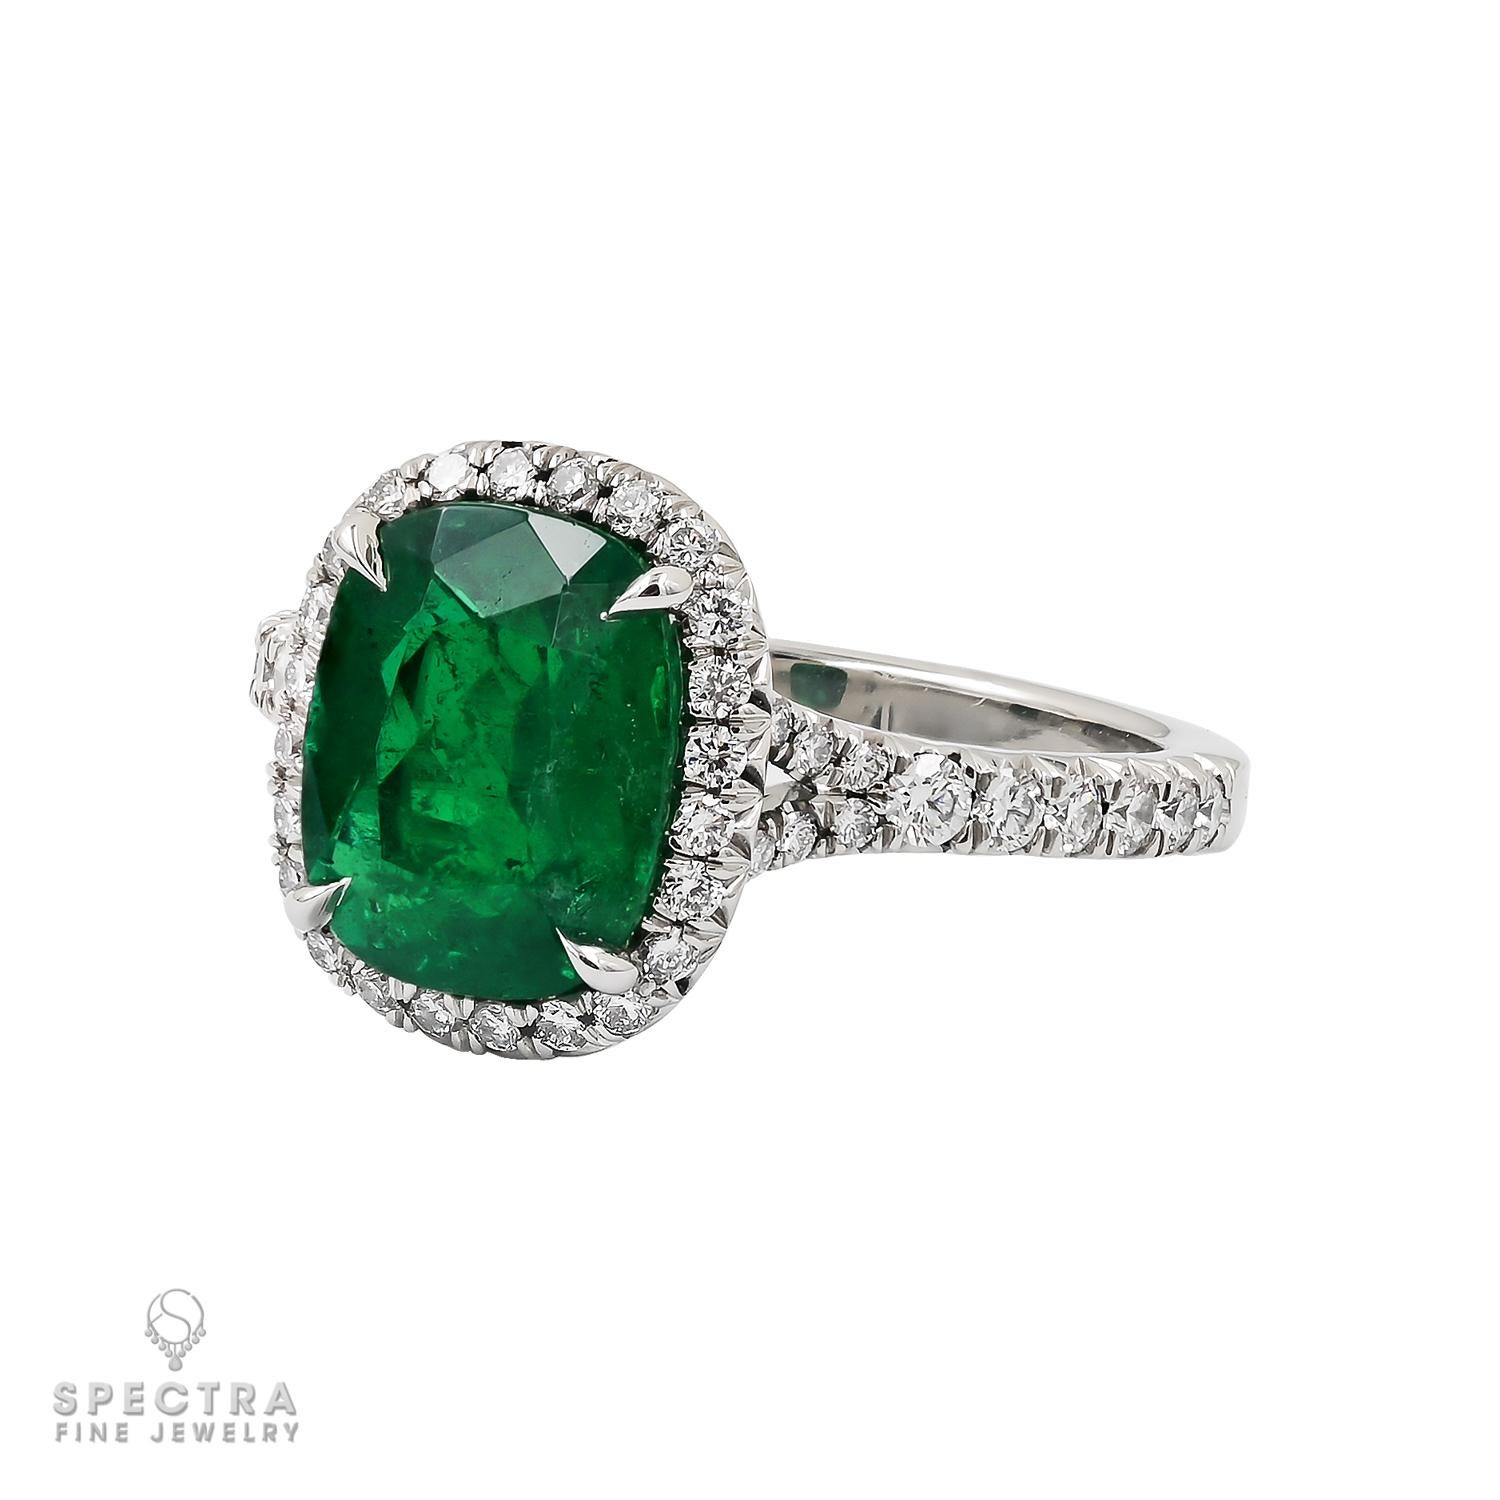 Embark on a journey of contemporary luxury and elegance with our 2.26-carat Cushion Colombian Emerald Diamond Ring — an exquisite piece of jewelry seamlessly marrying nature's brilliance with impeccable craftsmanship.
At its core, a resplendent